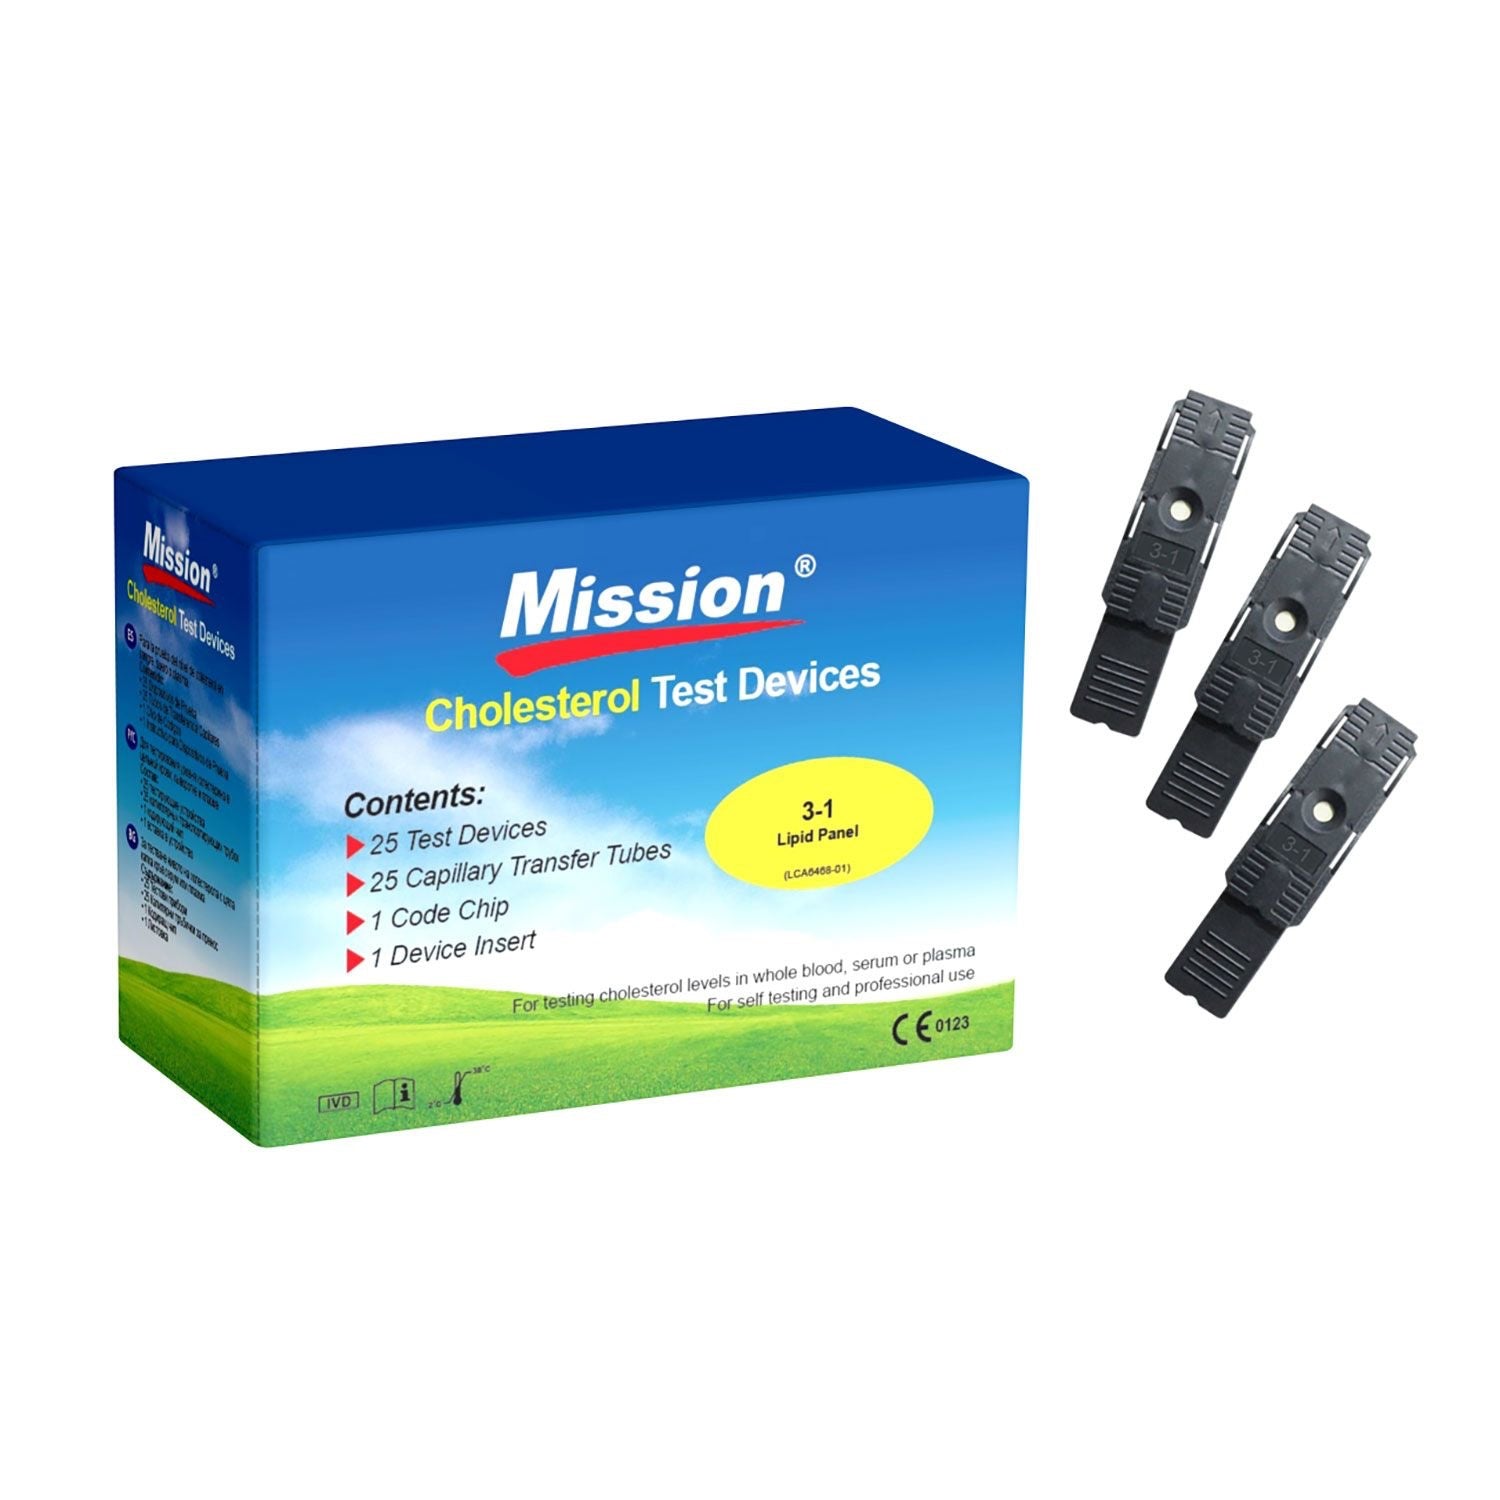 Suresign Mission Cholesterol 3-1 Lipid Panel Test Devices | Pack of 25